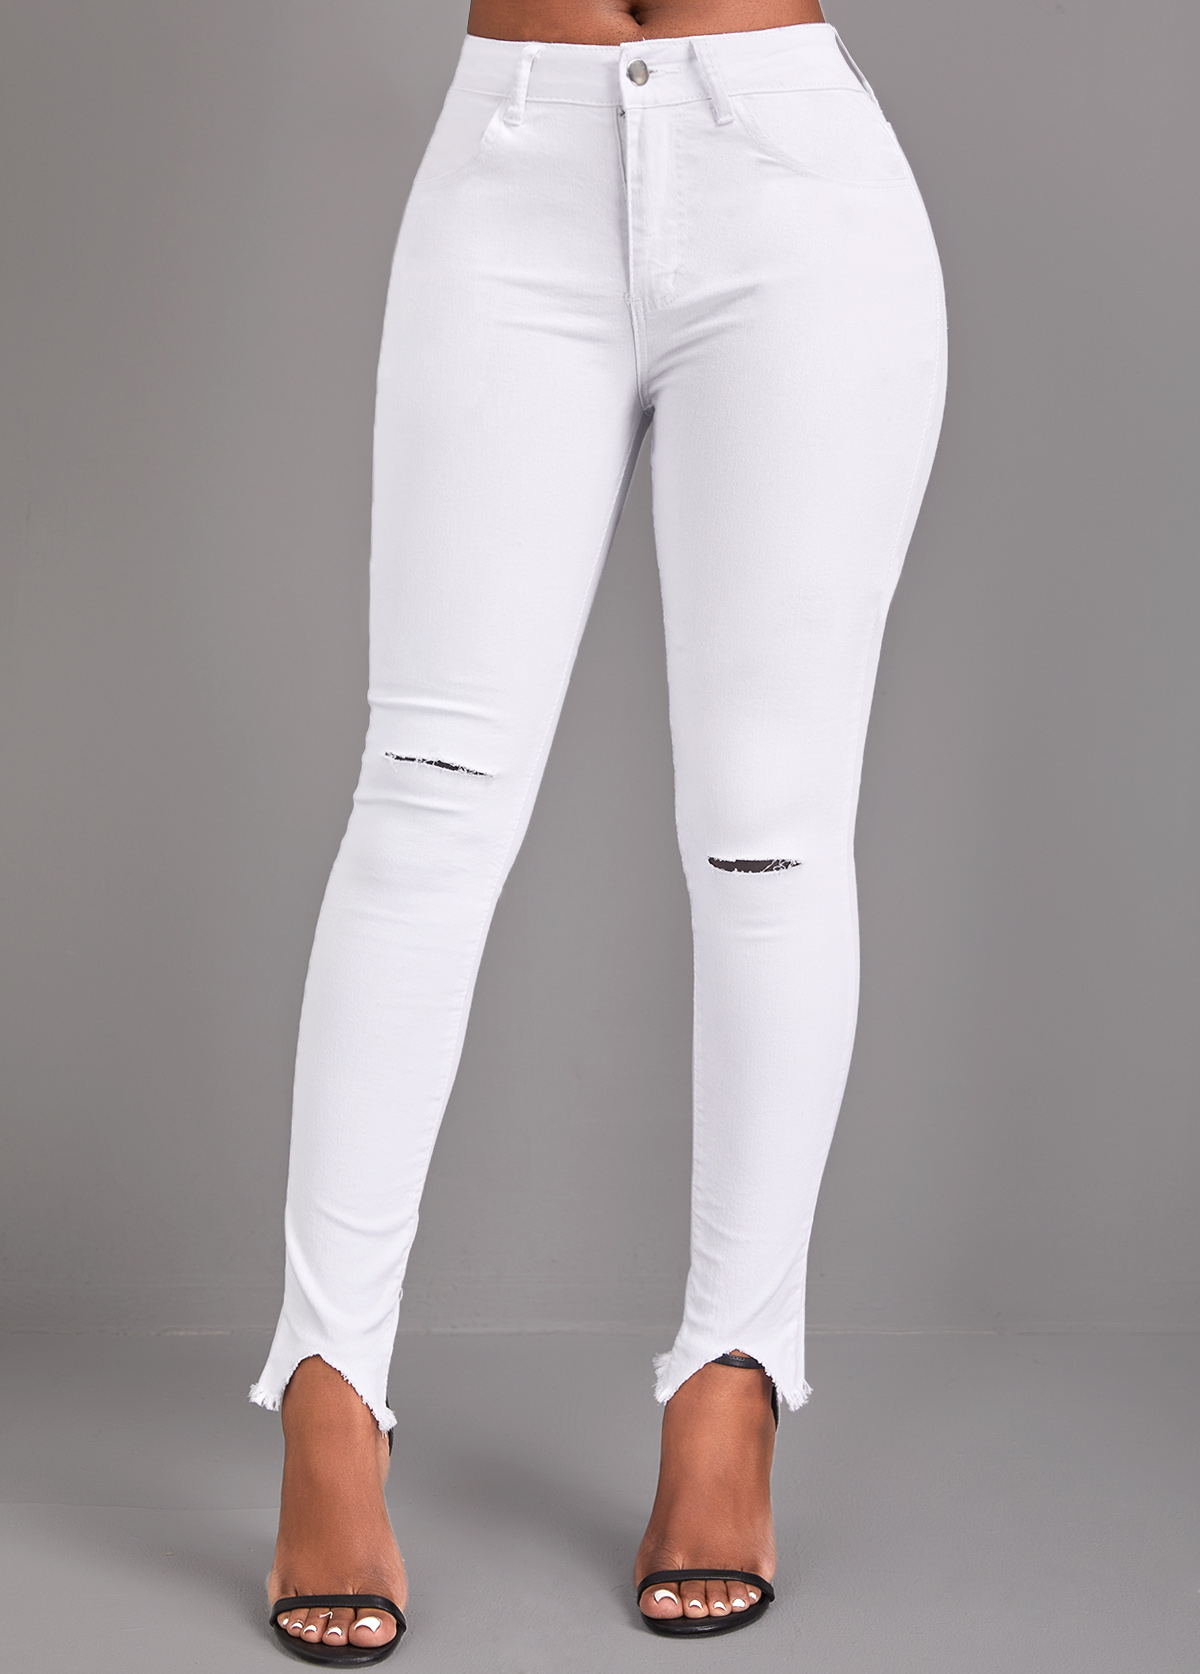 Button White High Waisted Skinny Jeans